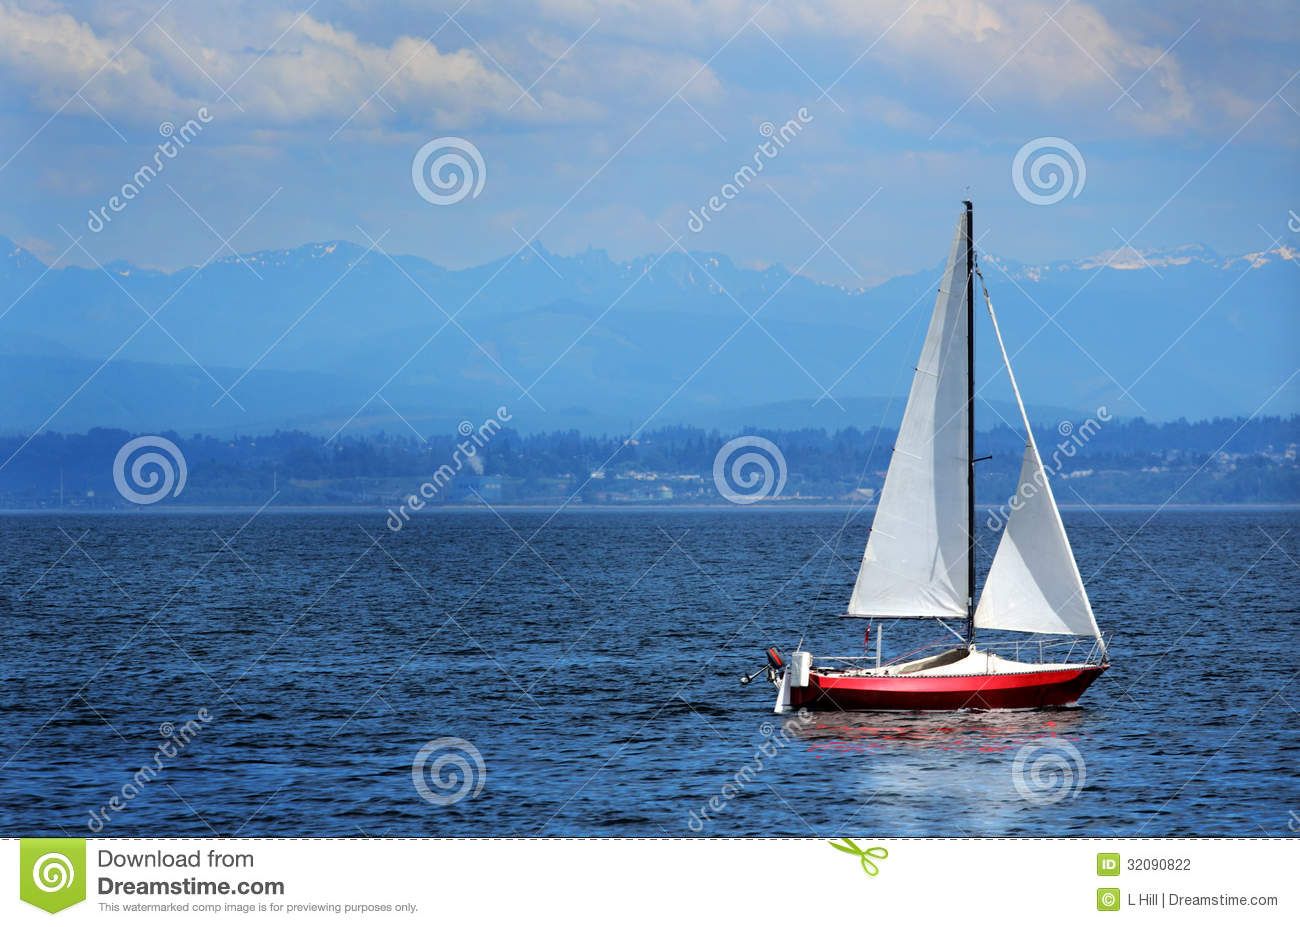 Sailboat Under Dark Blue Skies View Of An Island Community And